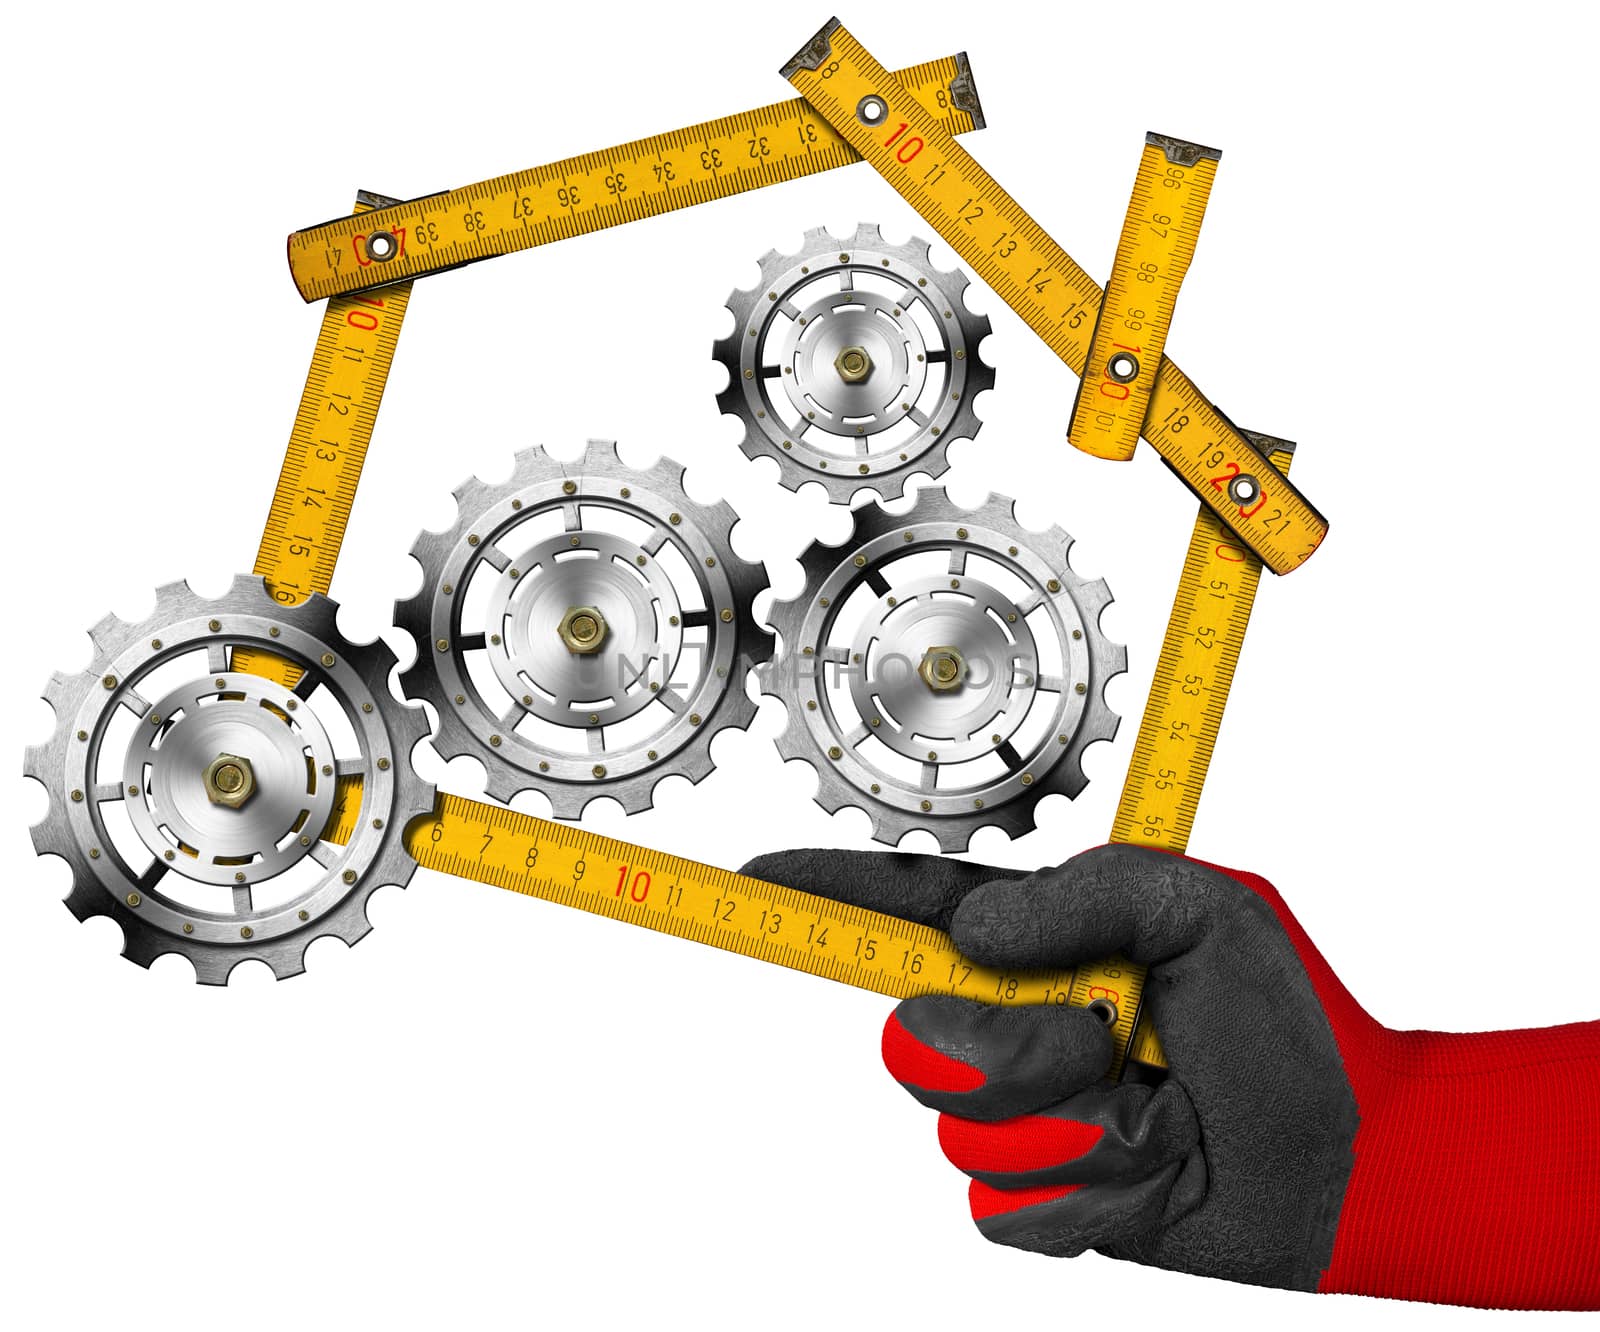 Hand with work glove holding a yellow wooden meter ruler in the shape of house with gears, symbol of house industry. Isolated on a white background